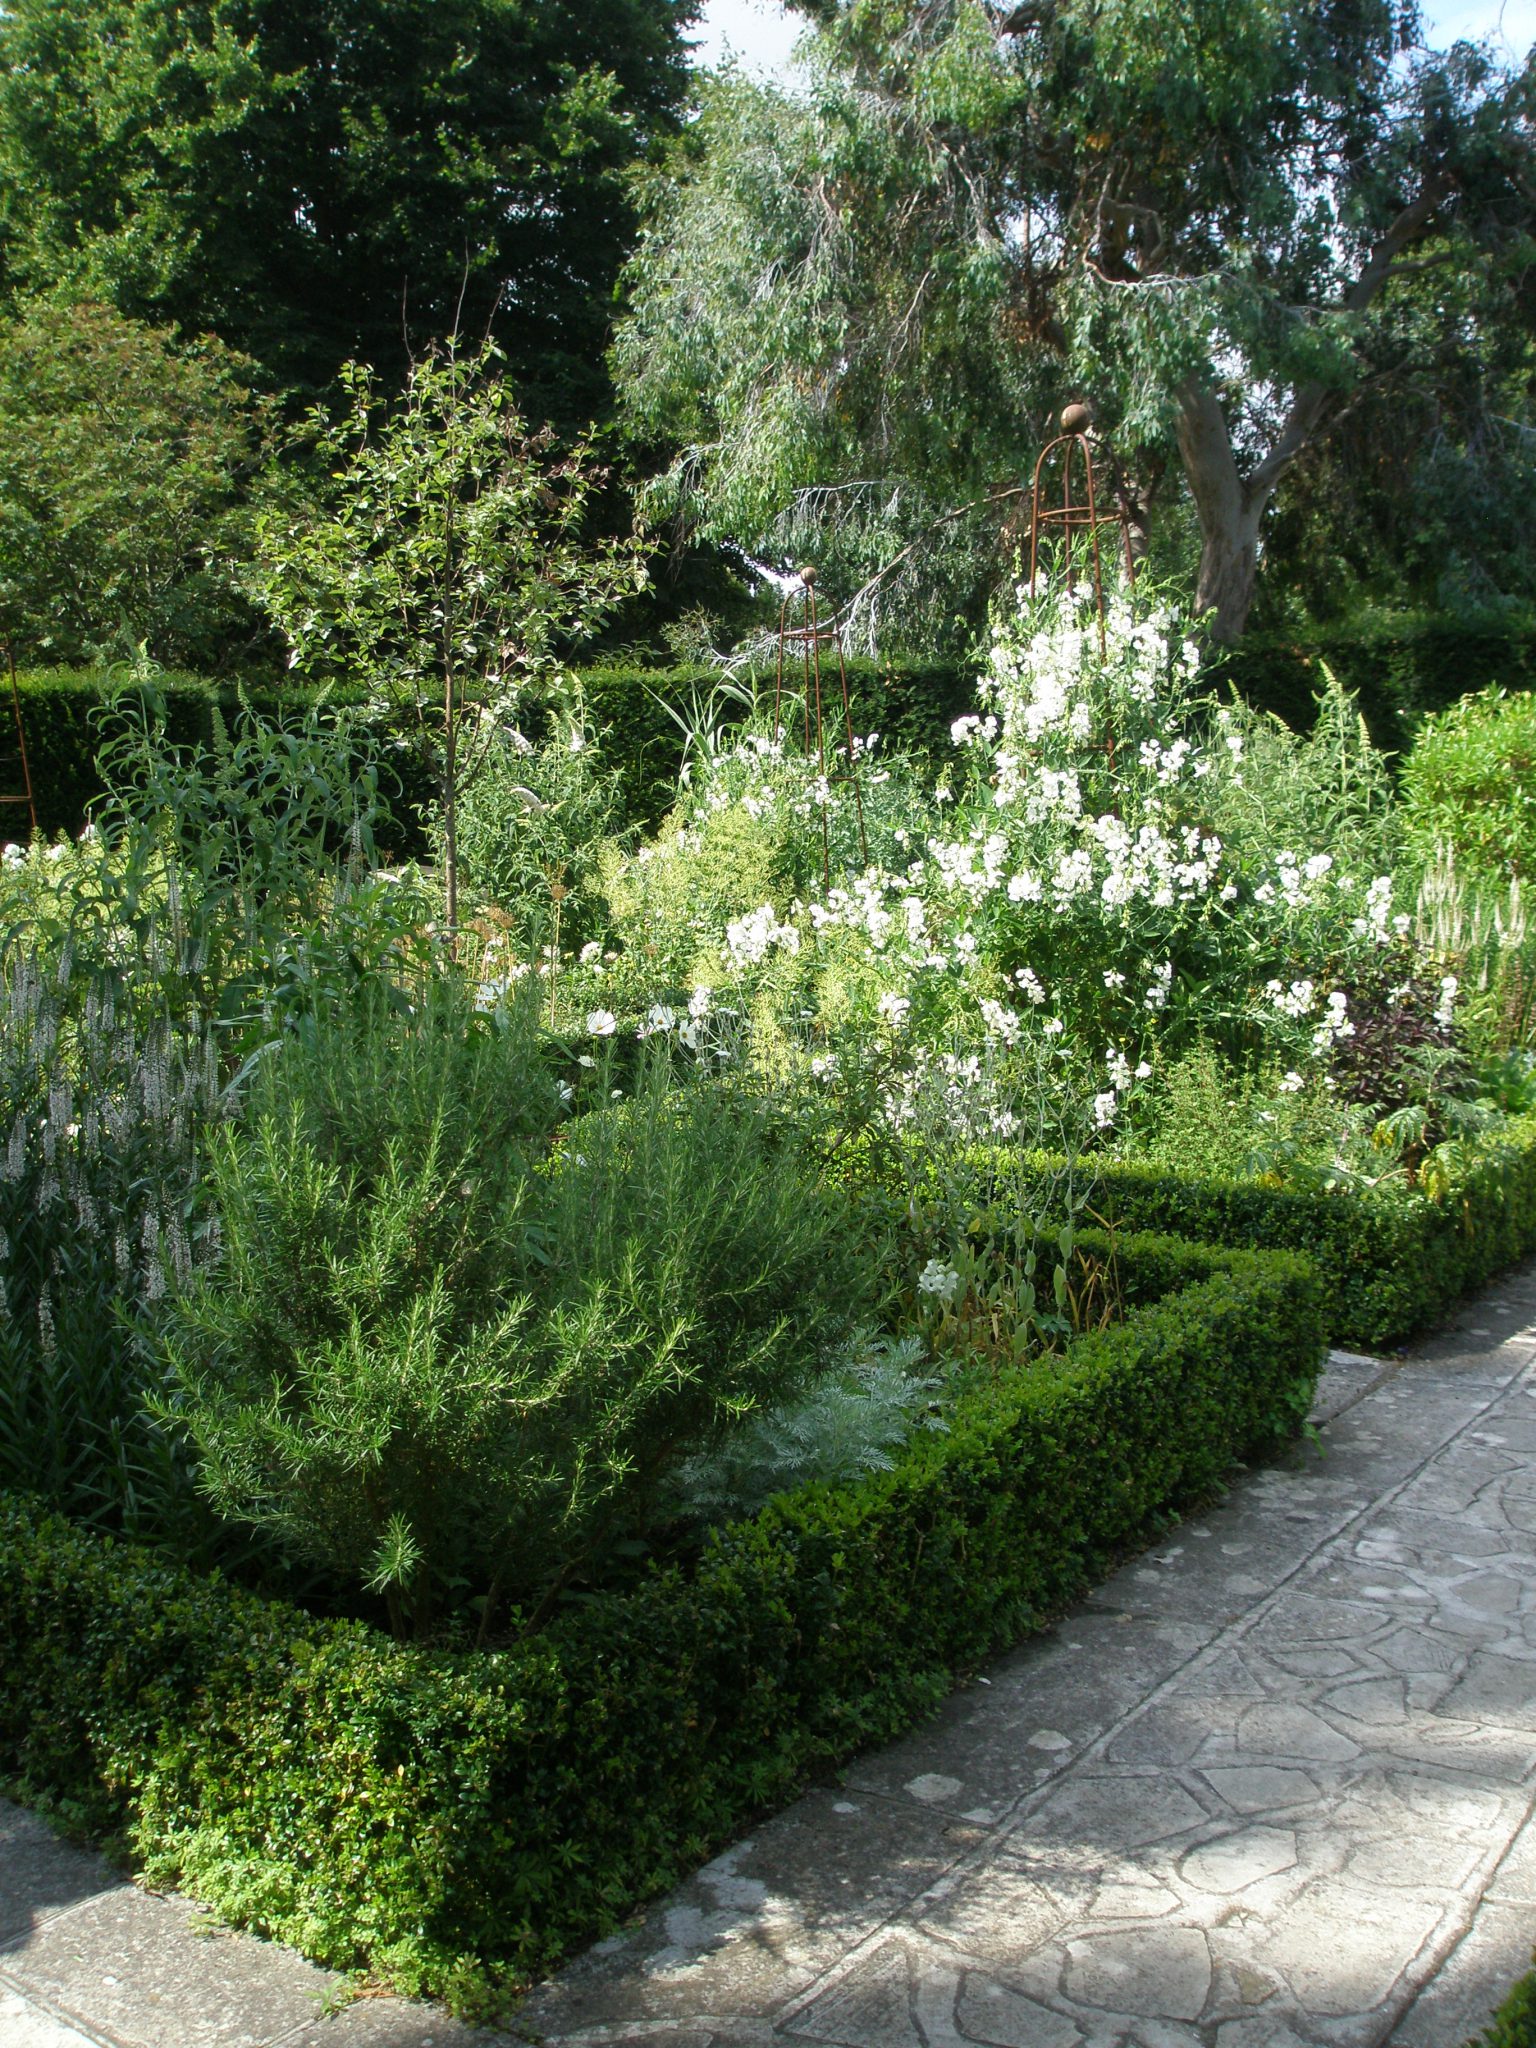 Shoe-horned into the most-pointed space on the property is the Circular White Garden